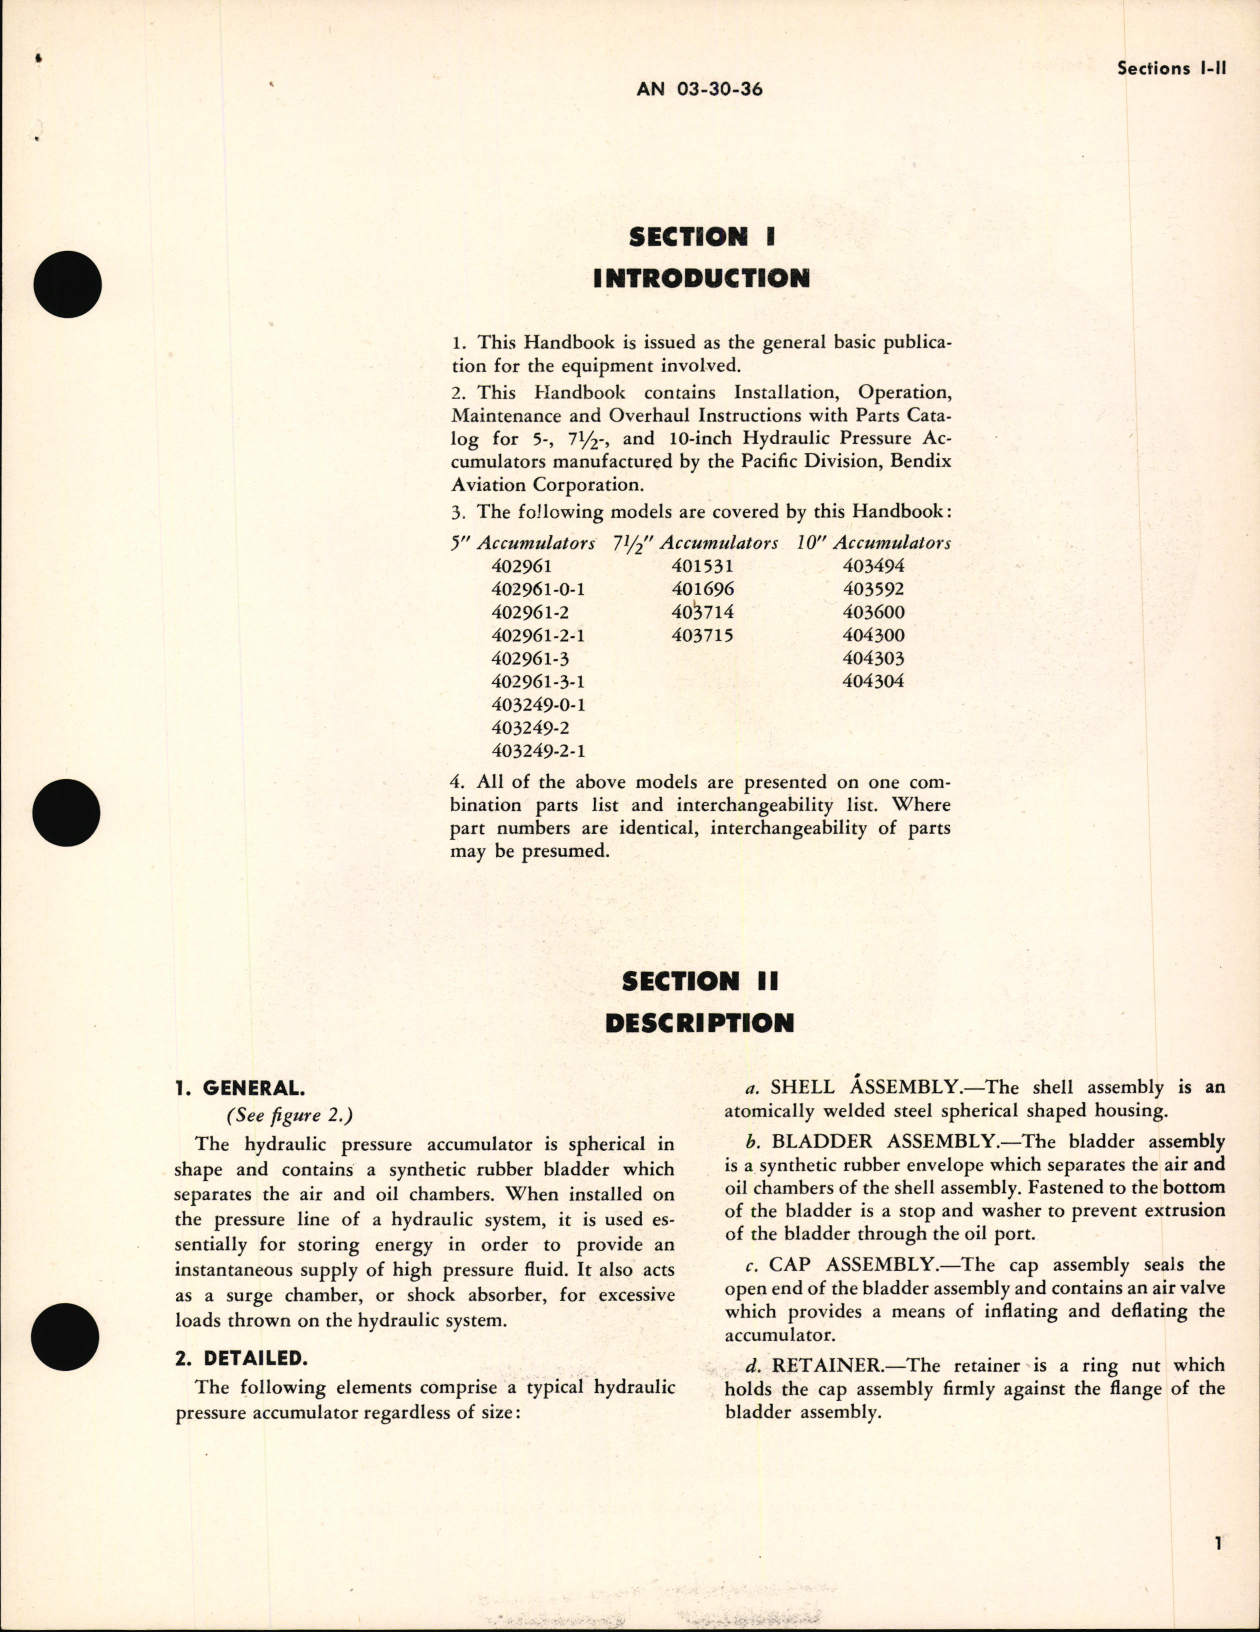 Sample page 5 from AirCorps Library document: Operation, Service and Overhaul Instructions With Parts Catalog For Hydraulic Pressure Accumulators